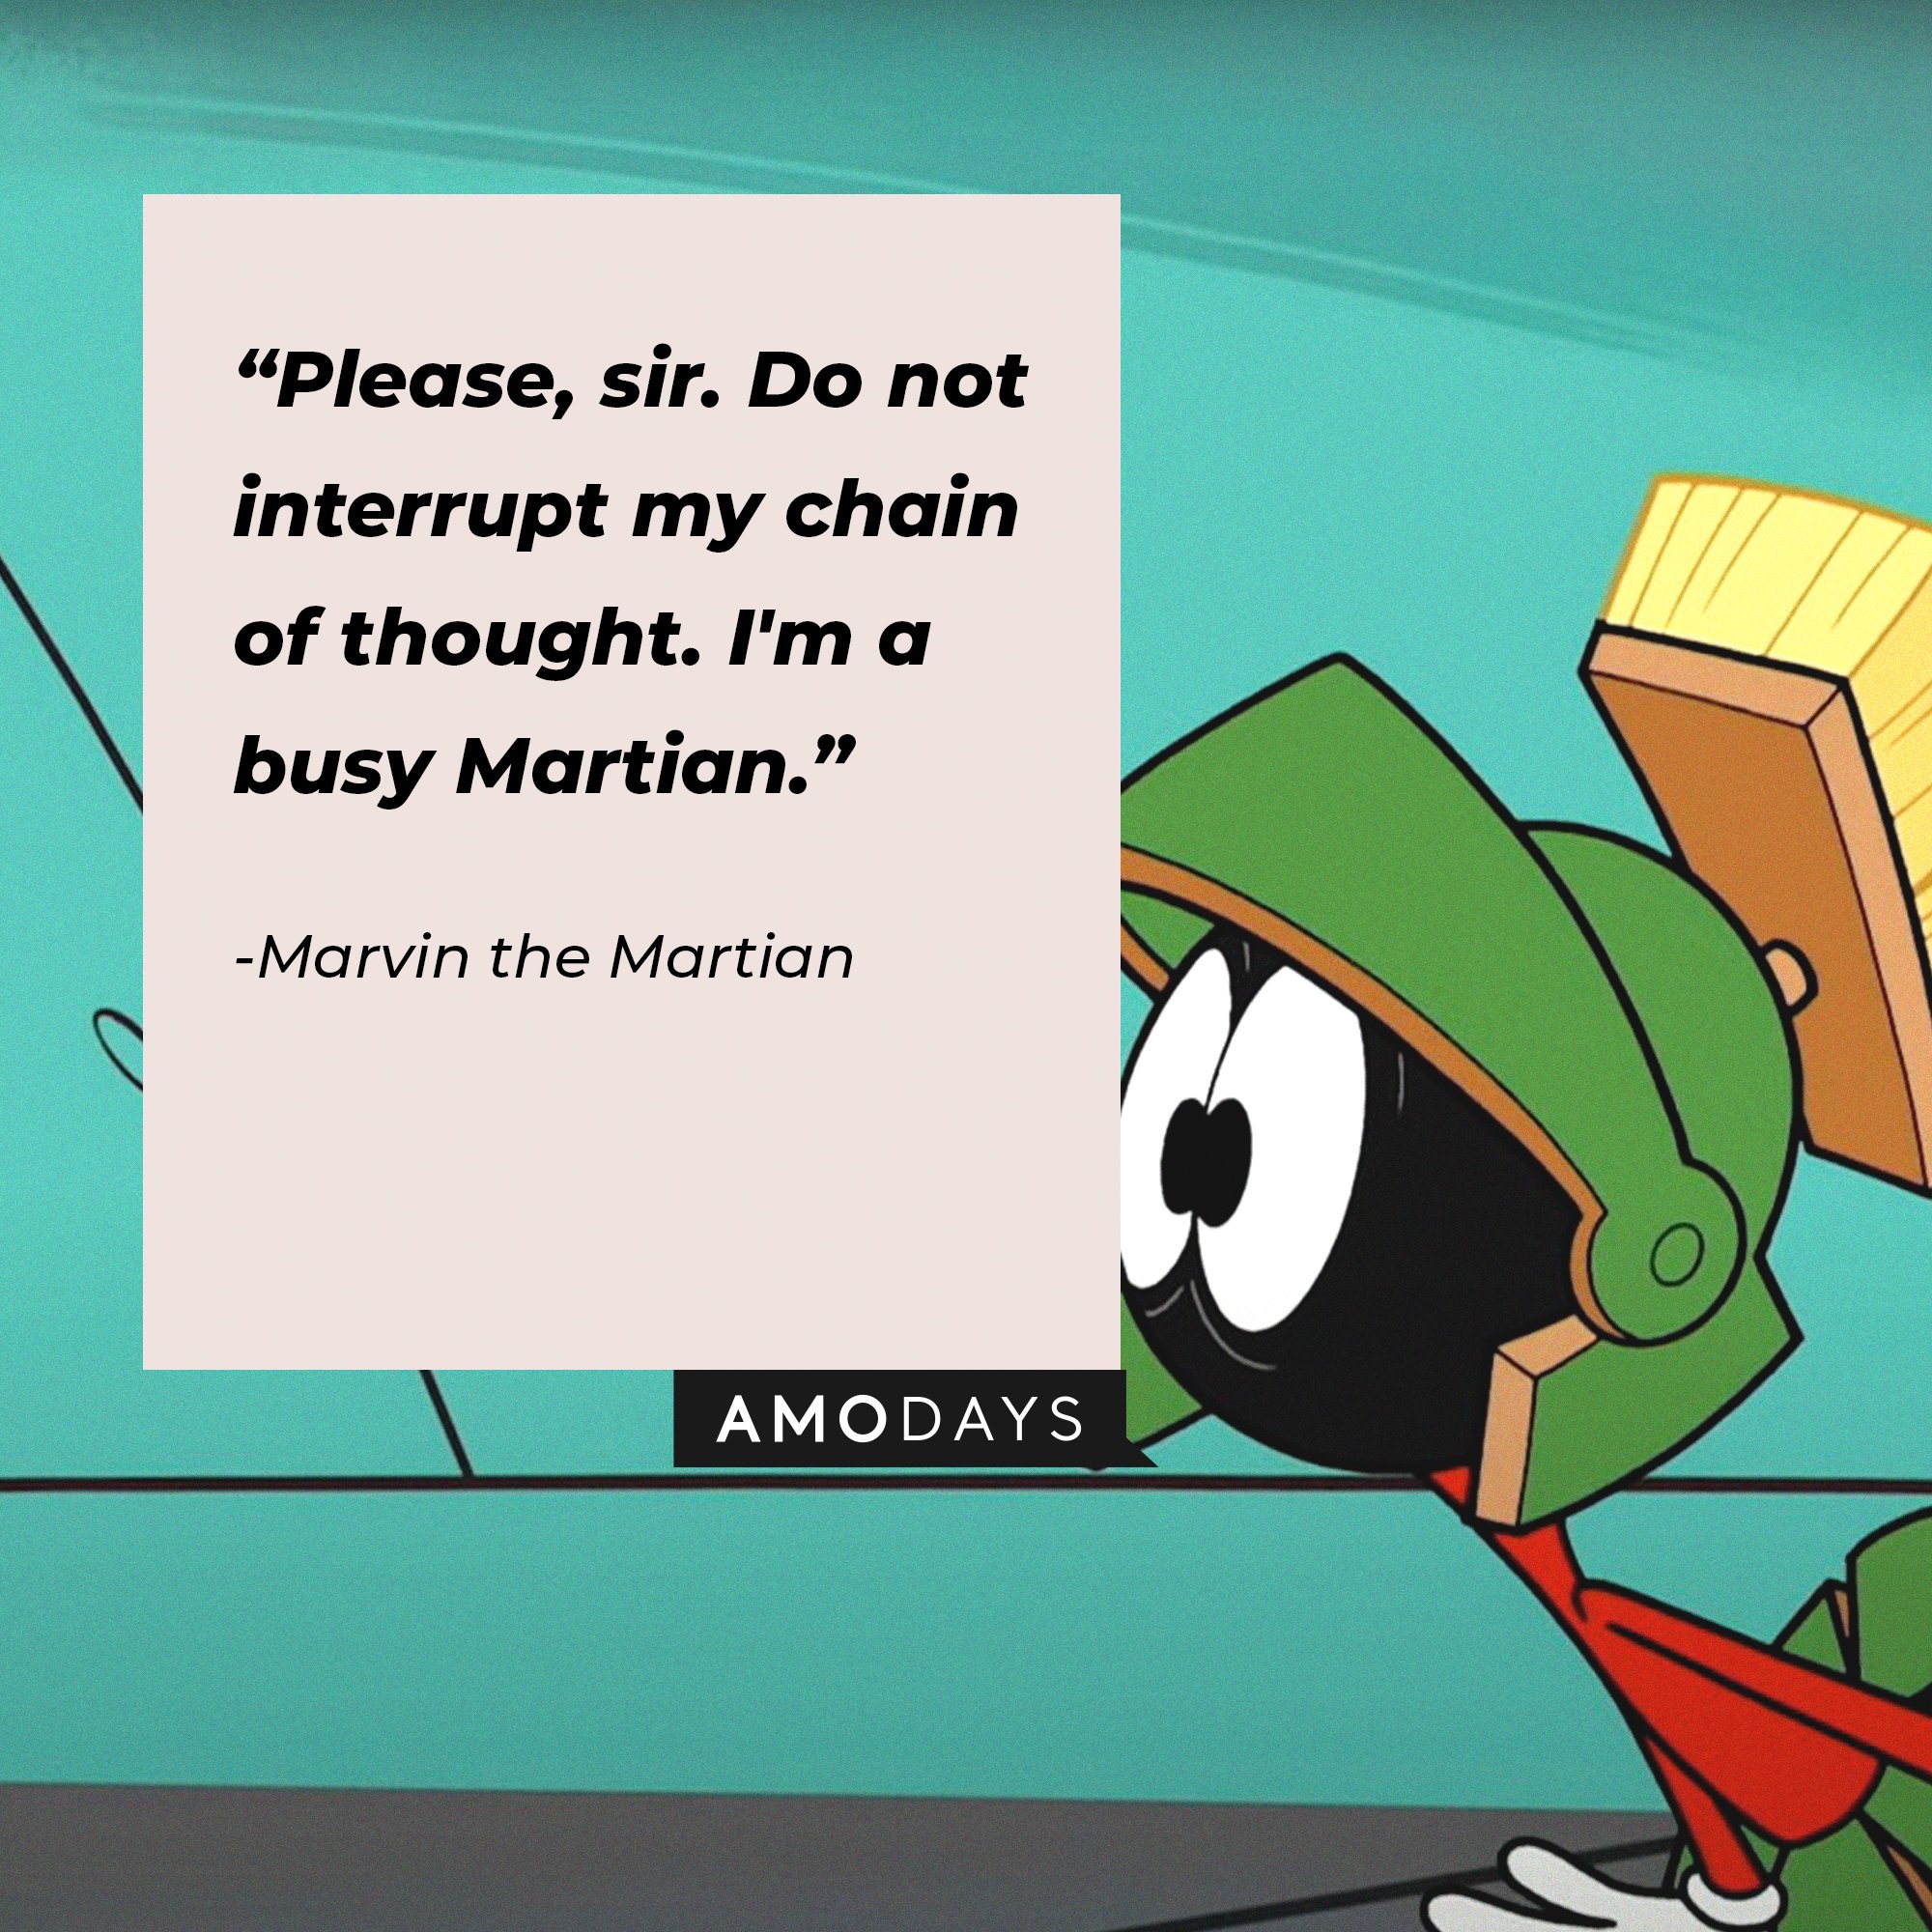 Marvin the Martian’s quote: “Please, sir. Do not interrupt my chain of thought. I'm a busy Martian." | Image: AmoDays